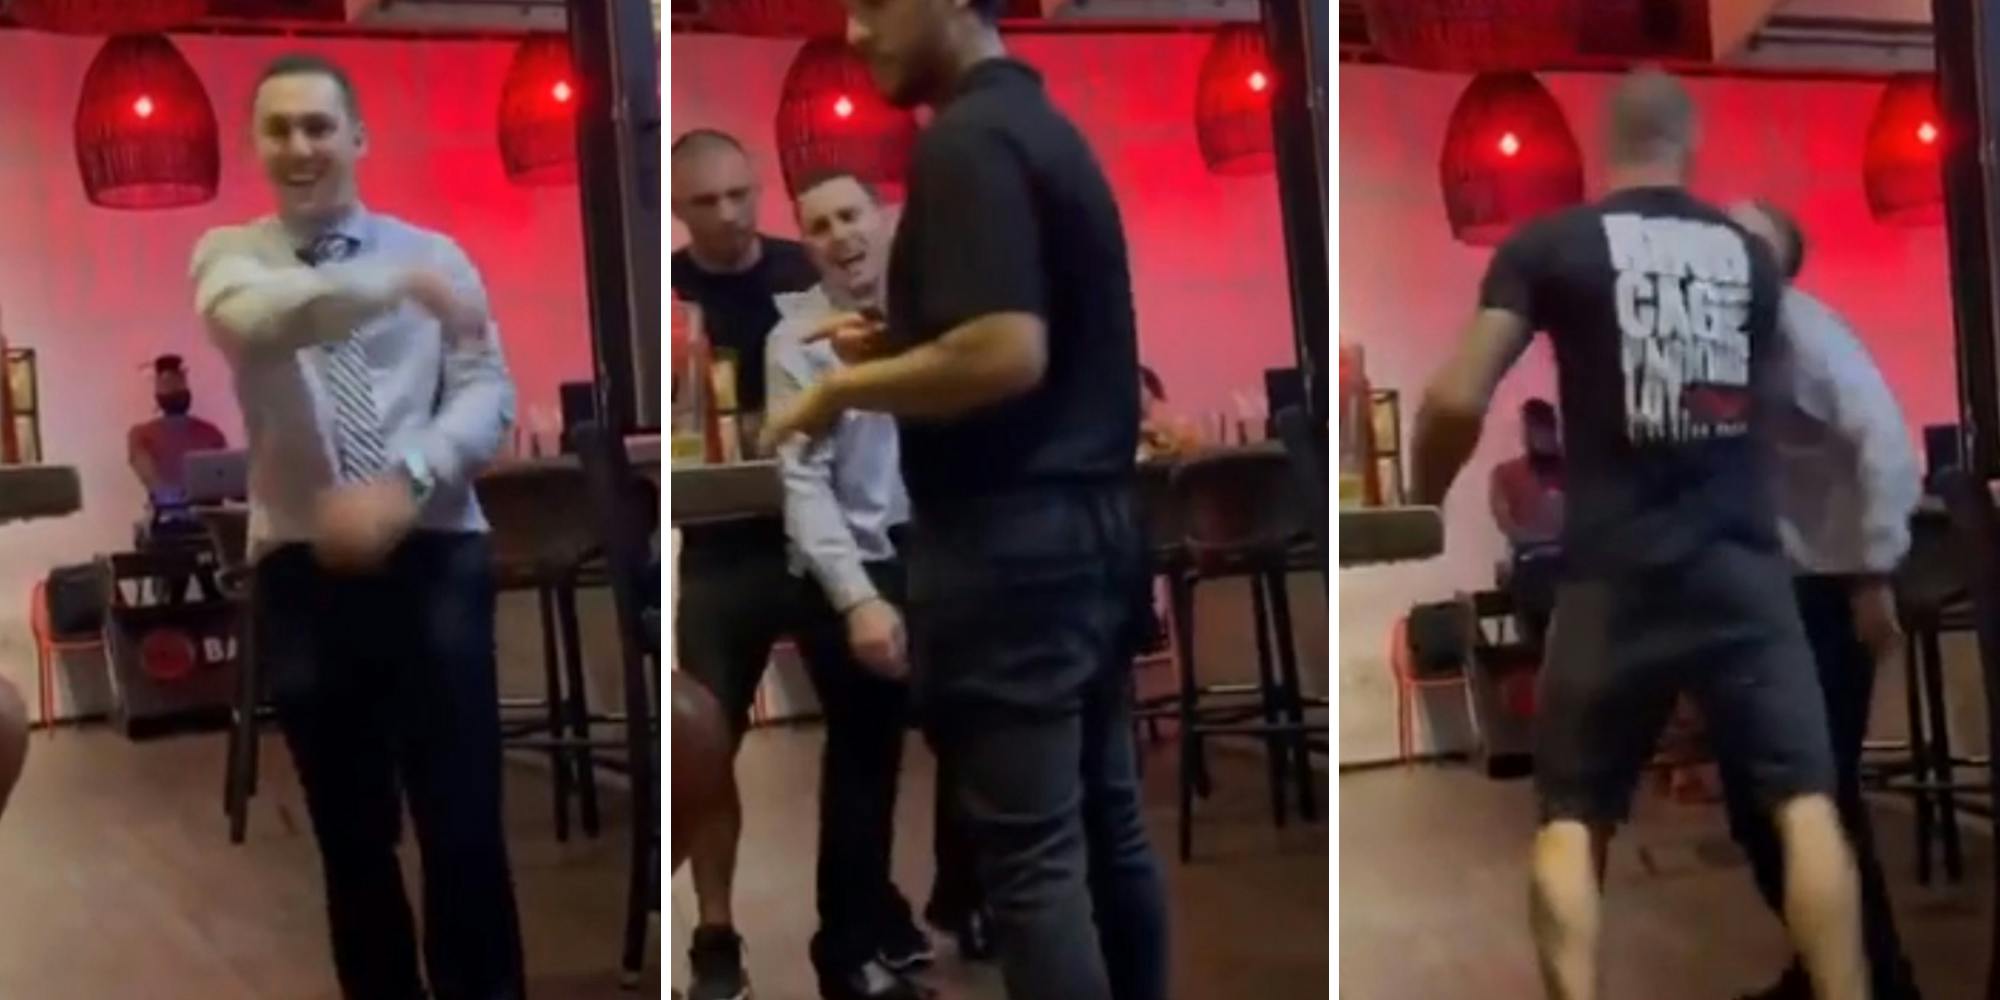 man smiling and dancing (l) man walking into another from behind, waiter standing nearby (c) man from behind assaults man dancing (r)